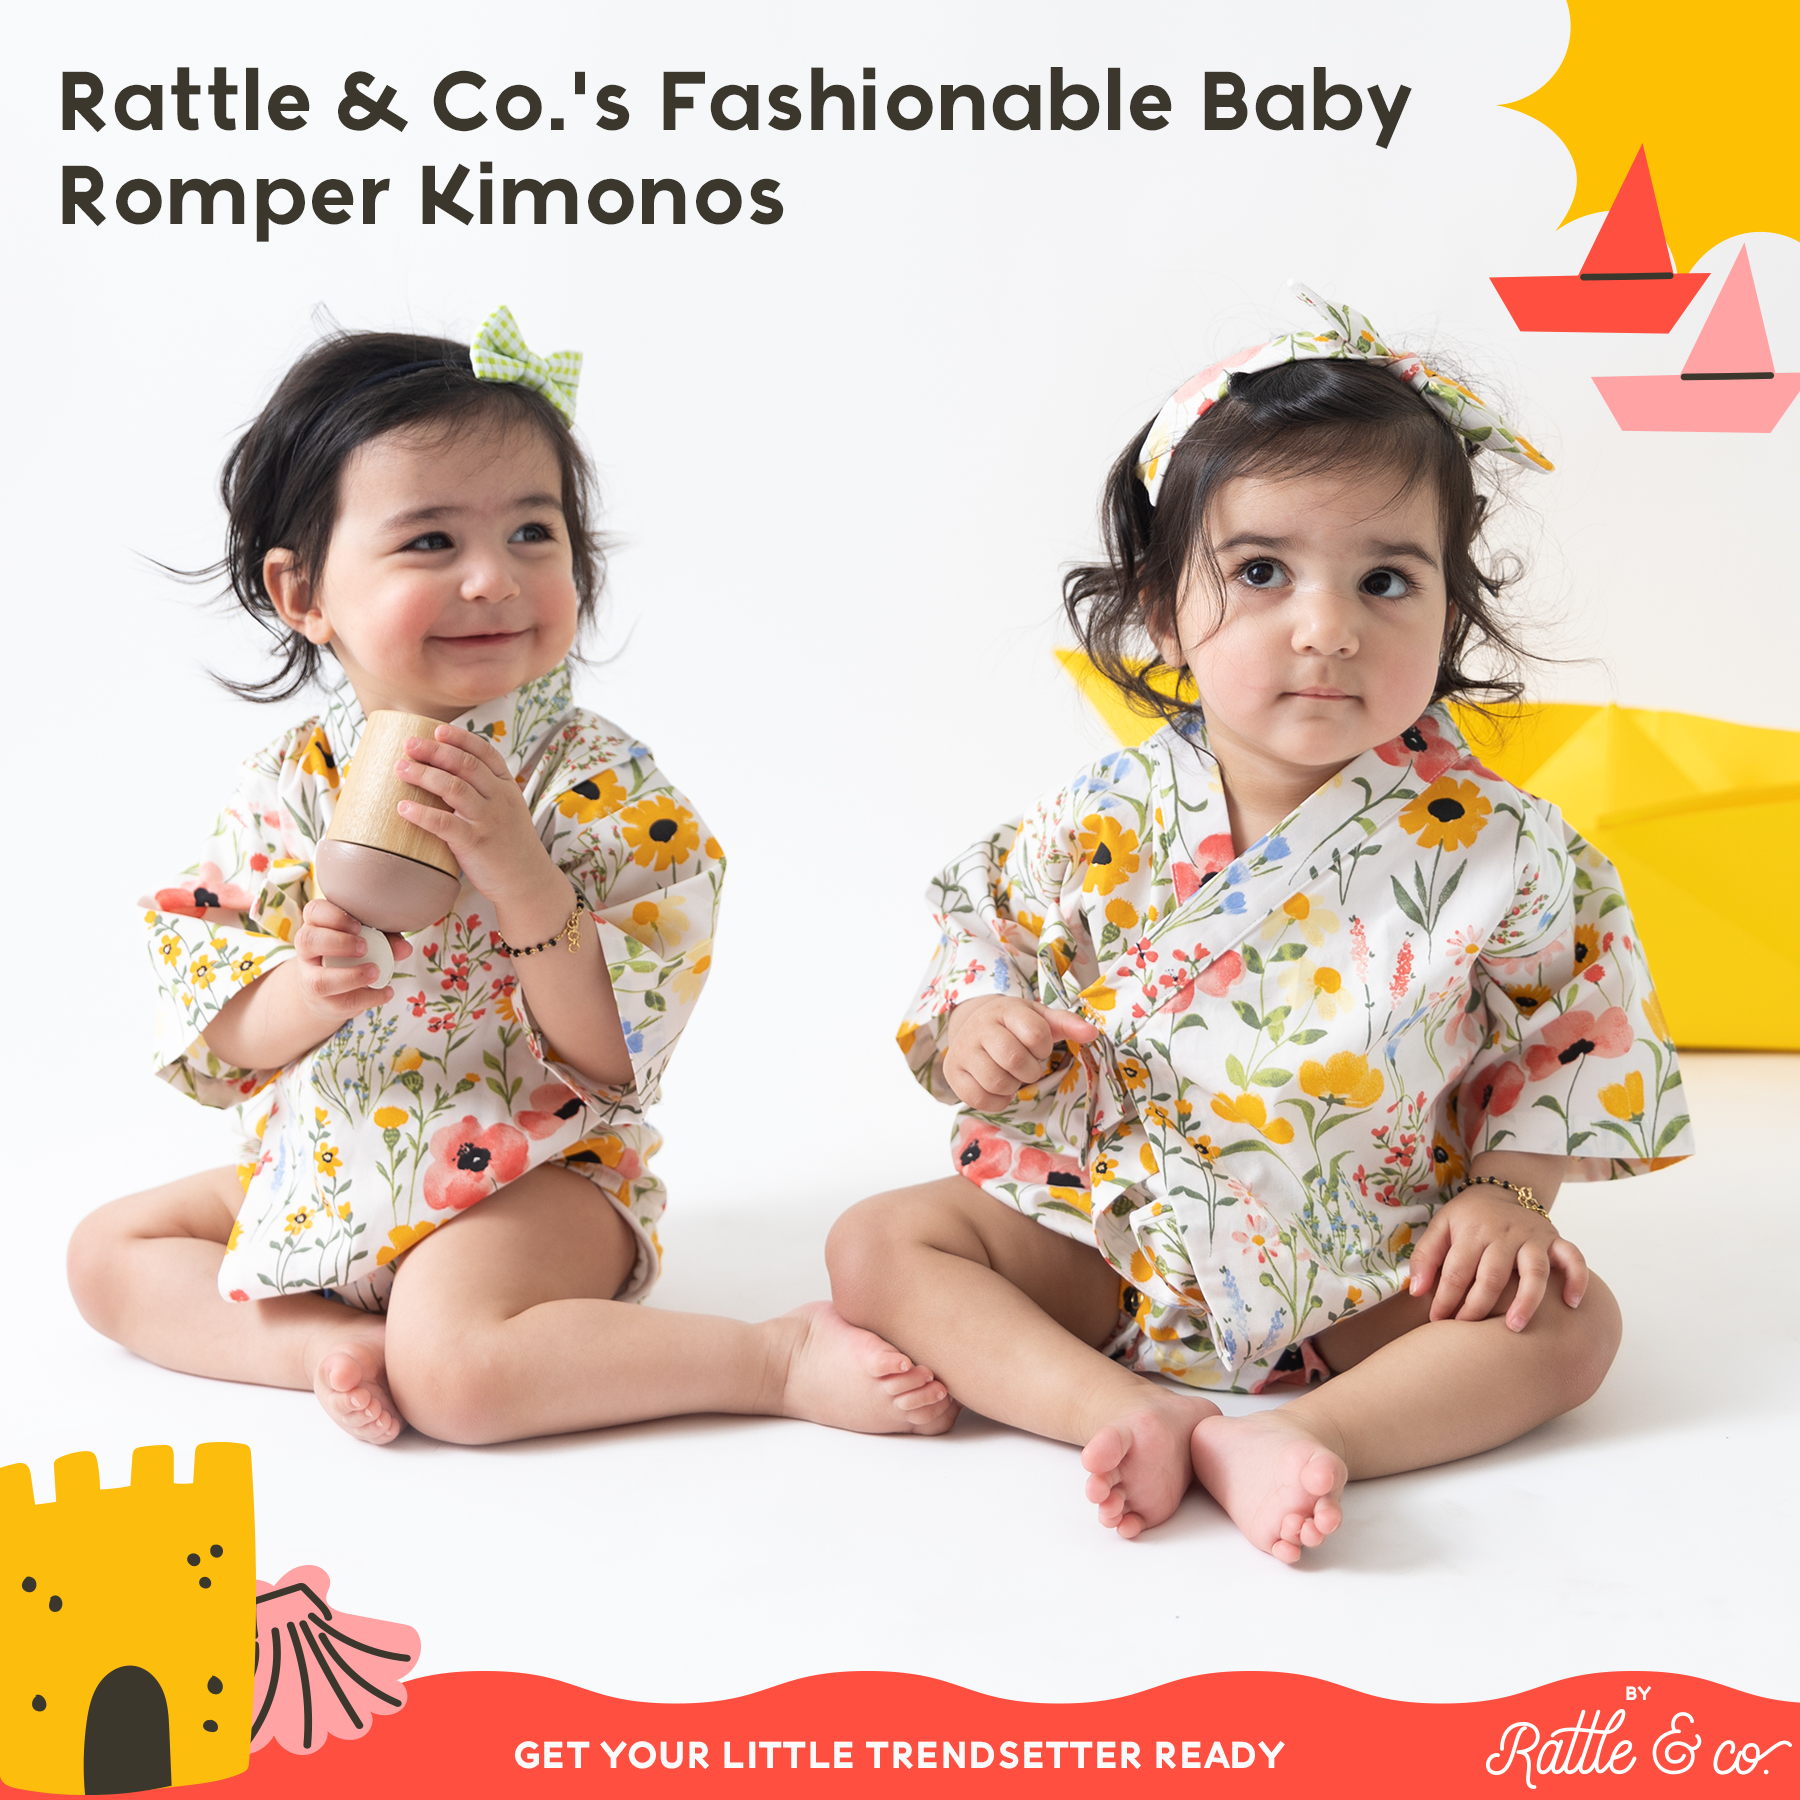 Get Your Little Trendsetter Ready: Rattle & Co.'s Fashionable Baby Romper Kimonos